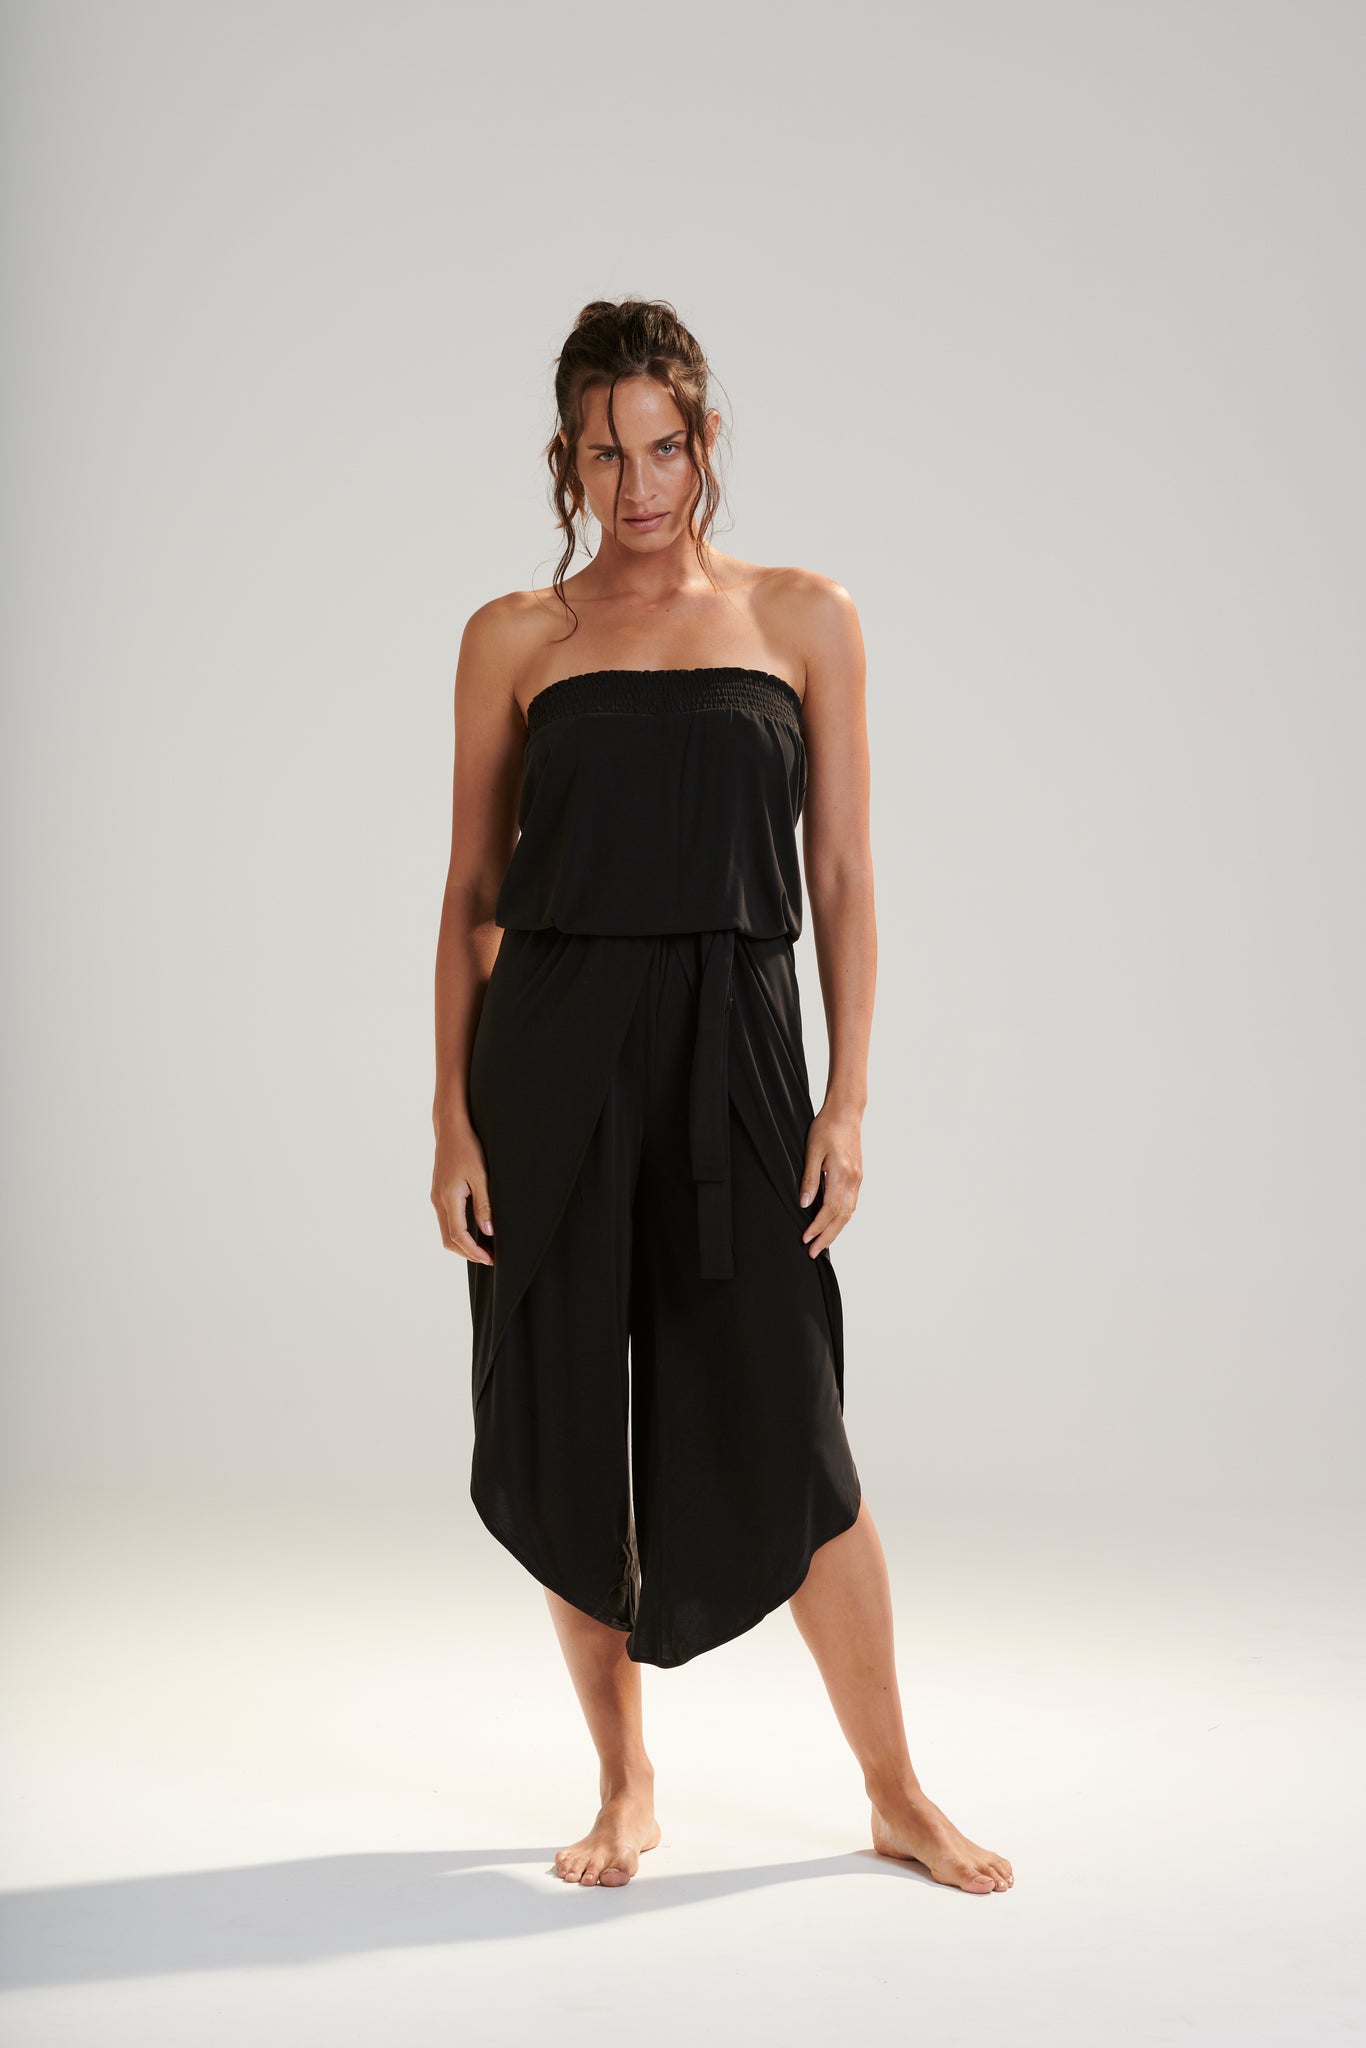 FREYA JUMPSUIT BEECHWOOD MODAL JERSEY SHIRRED BODICE AND PETAL WRAP LEG WITH ELASTIC WAIST AND REMOVABLE TIE IN DARK WASHED BLACK RELAXED FRONT VIEW